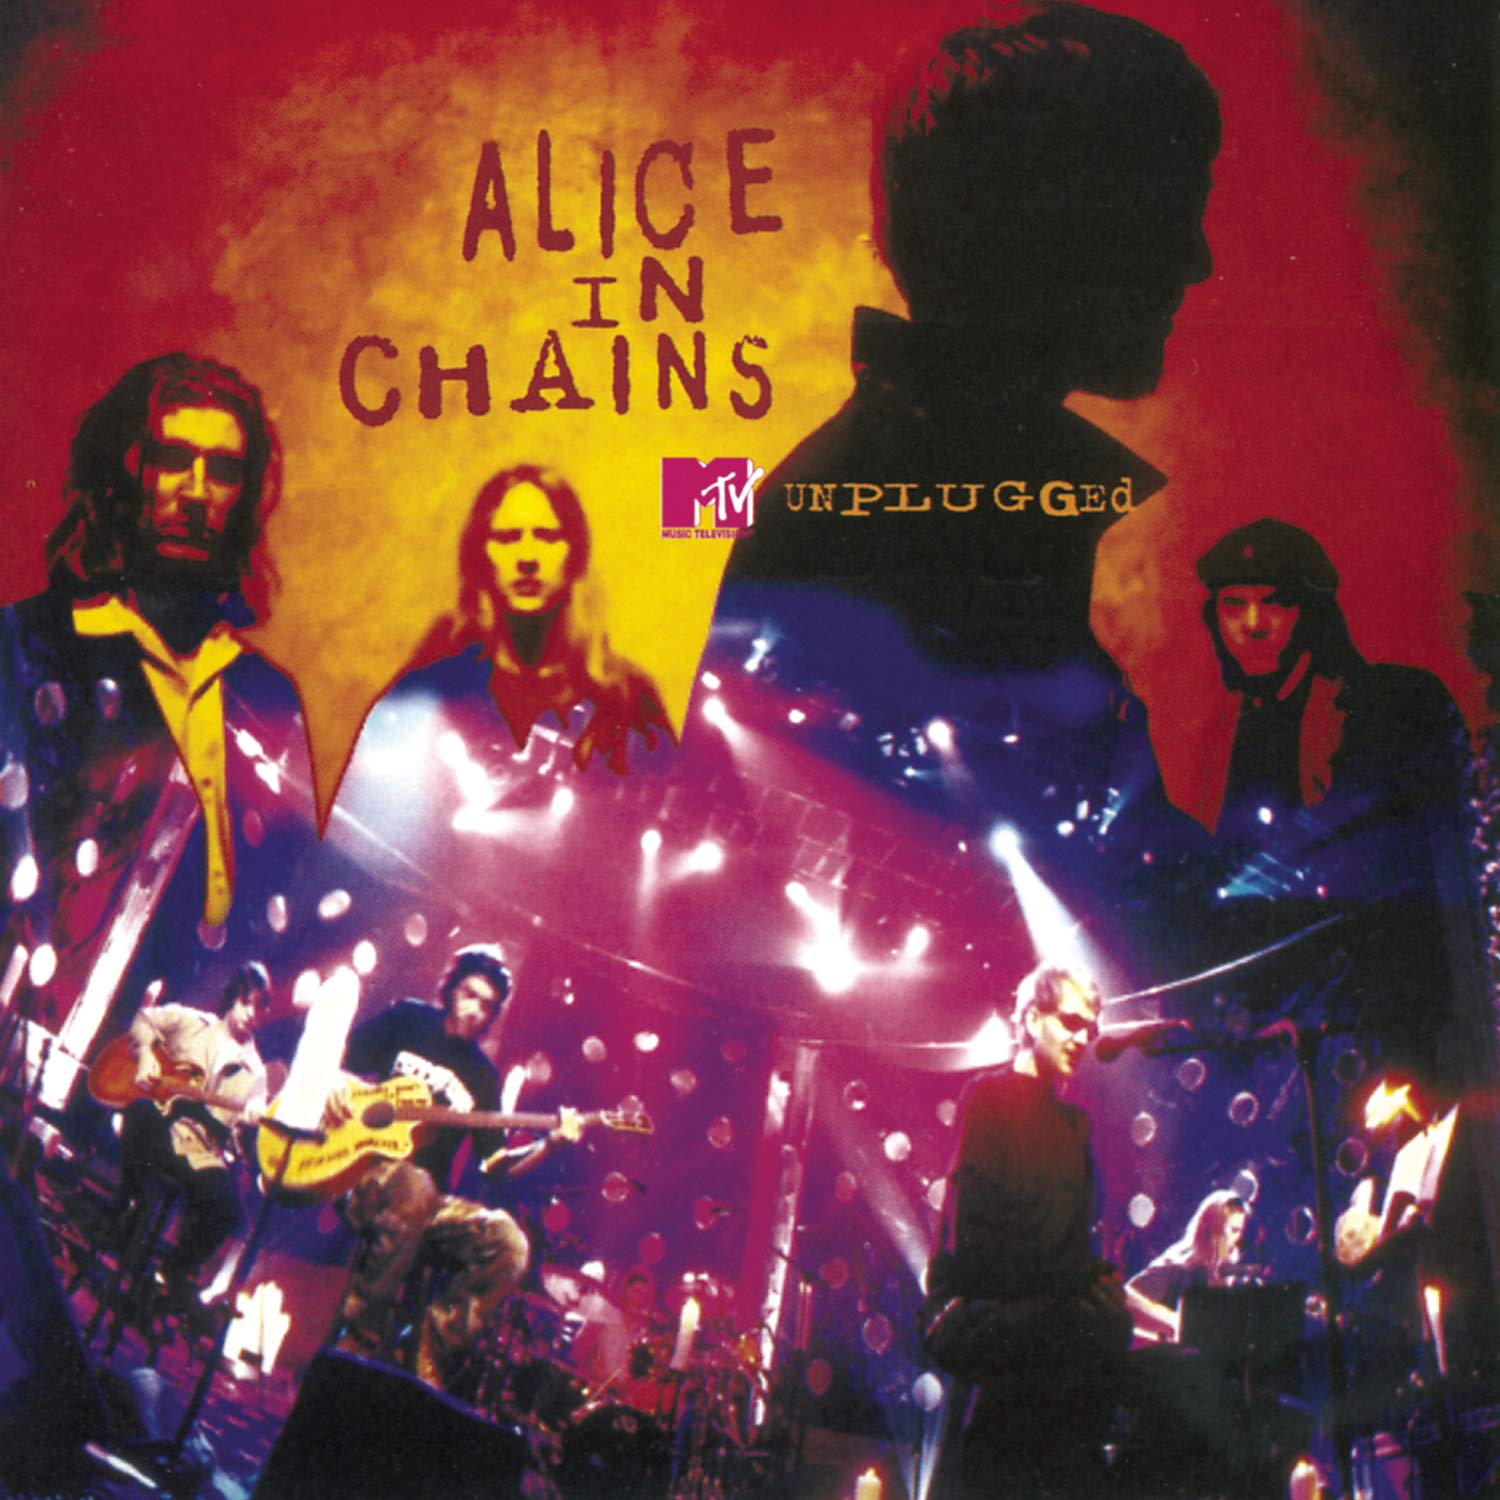 Alice in Chains — Down In A Hole - Unplugged cover artwork